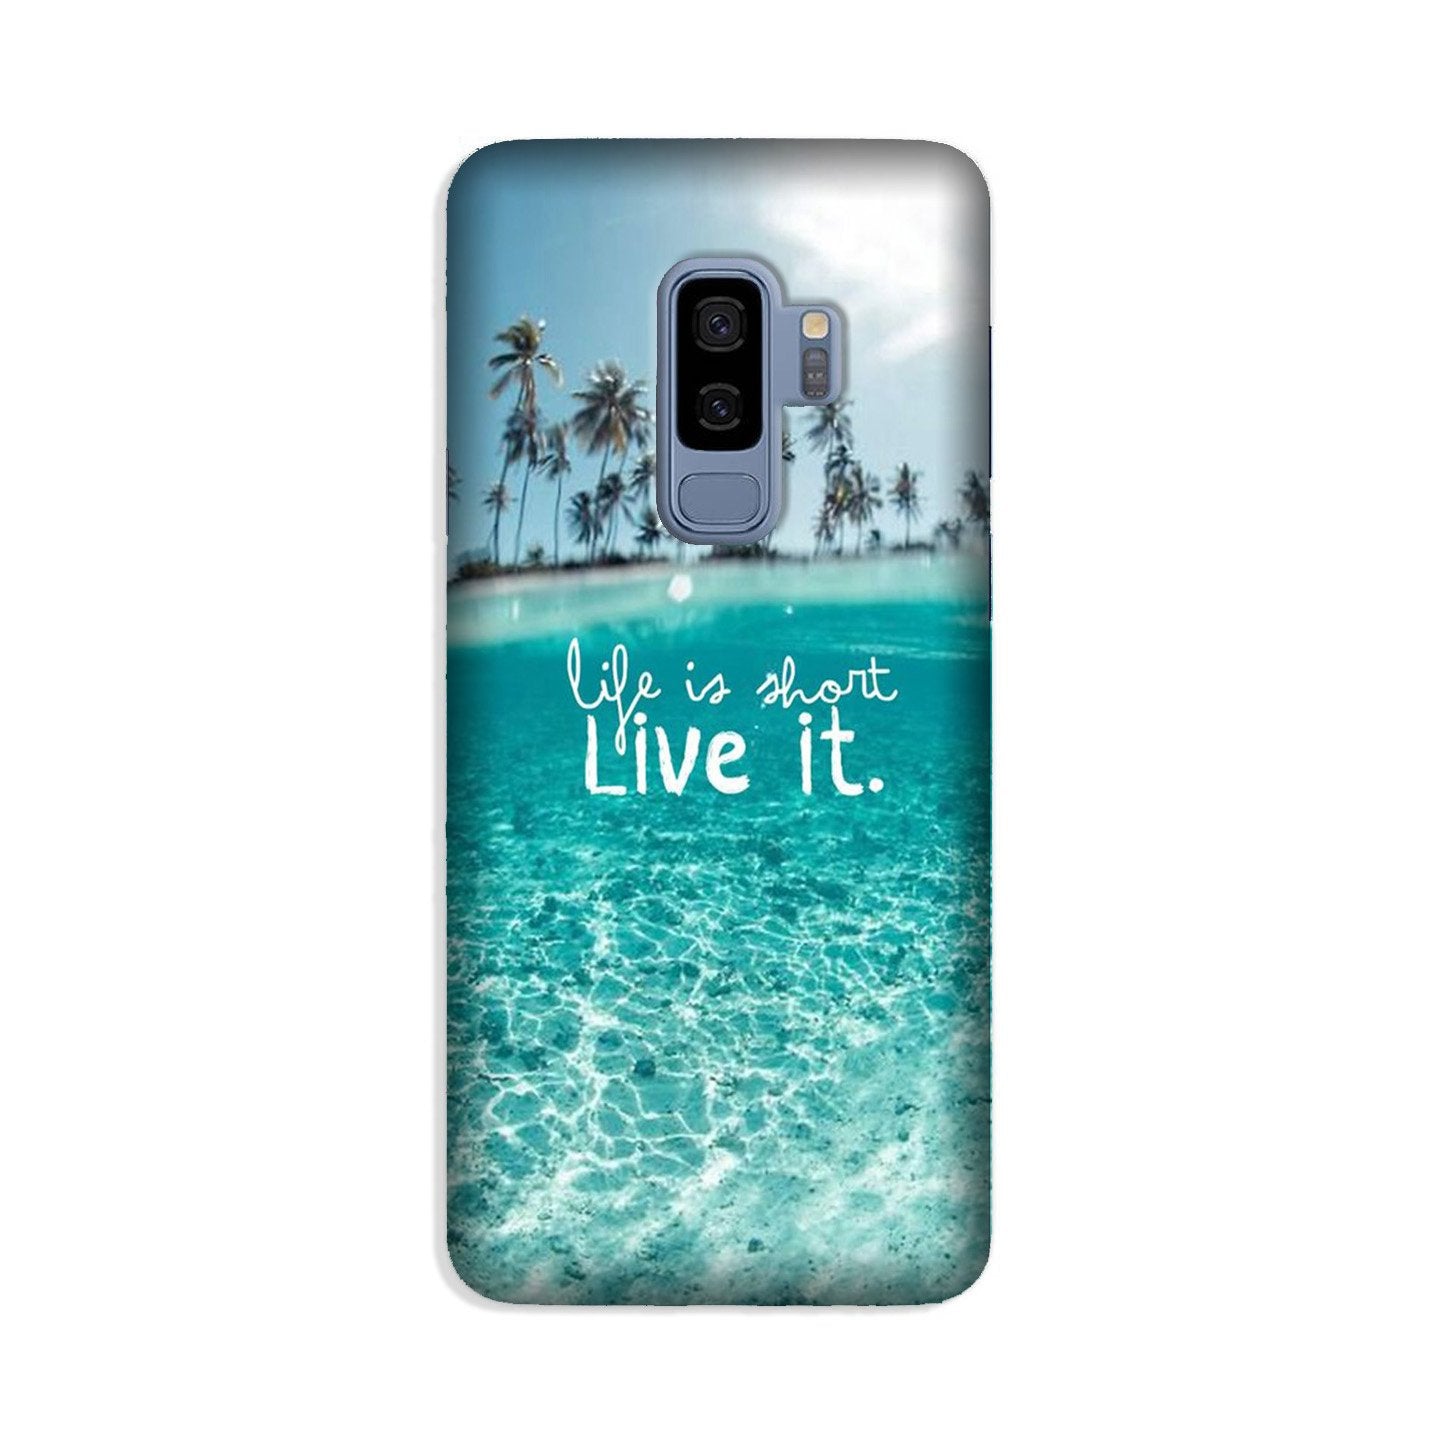 Life is short live it Case for Galaxy S9 Plus